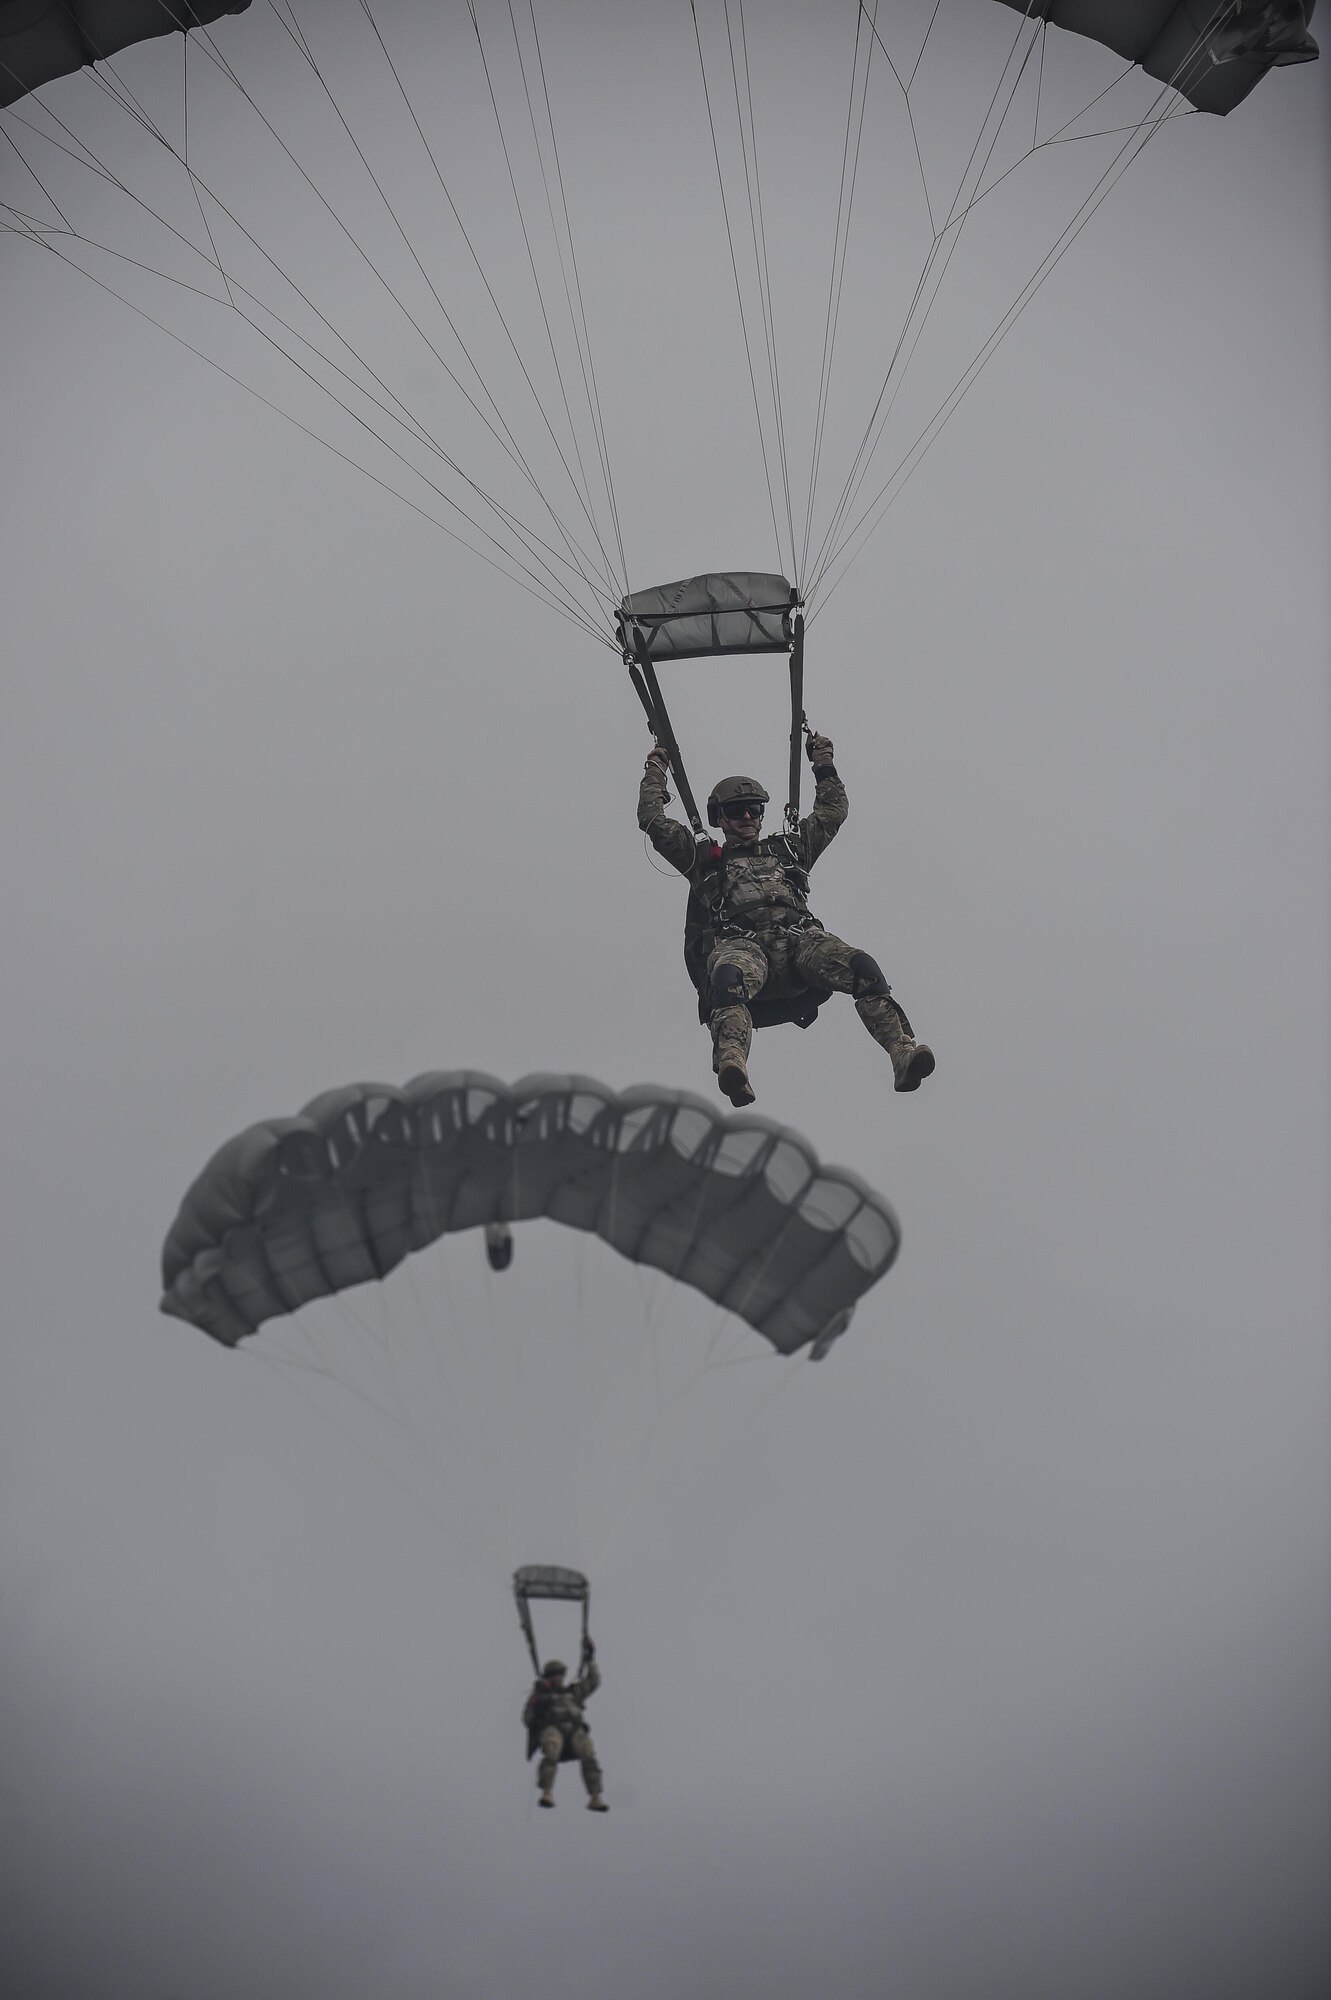 Chief Master Sgt. Bruce W. Dixon, the command chief master sergeant of the 24th Special Operations Wing, descends during his final military jump at Hurlburt Field, Fla., May 3, 2016. Dixon served 30 years as a combat controller, earning the title of master parachutist with more than 400 military jumps including three combat jumps in Afghanistan. In total, he spent ten of those thirty years away from his family, consistently serving his nation's call in dangerous ground combat and training. (U.S. Air Force photo by Airman 1st Class Kai White)